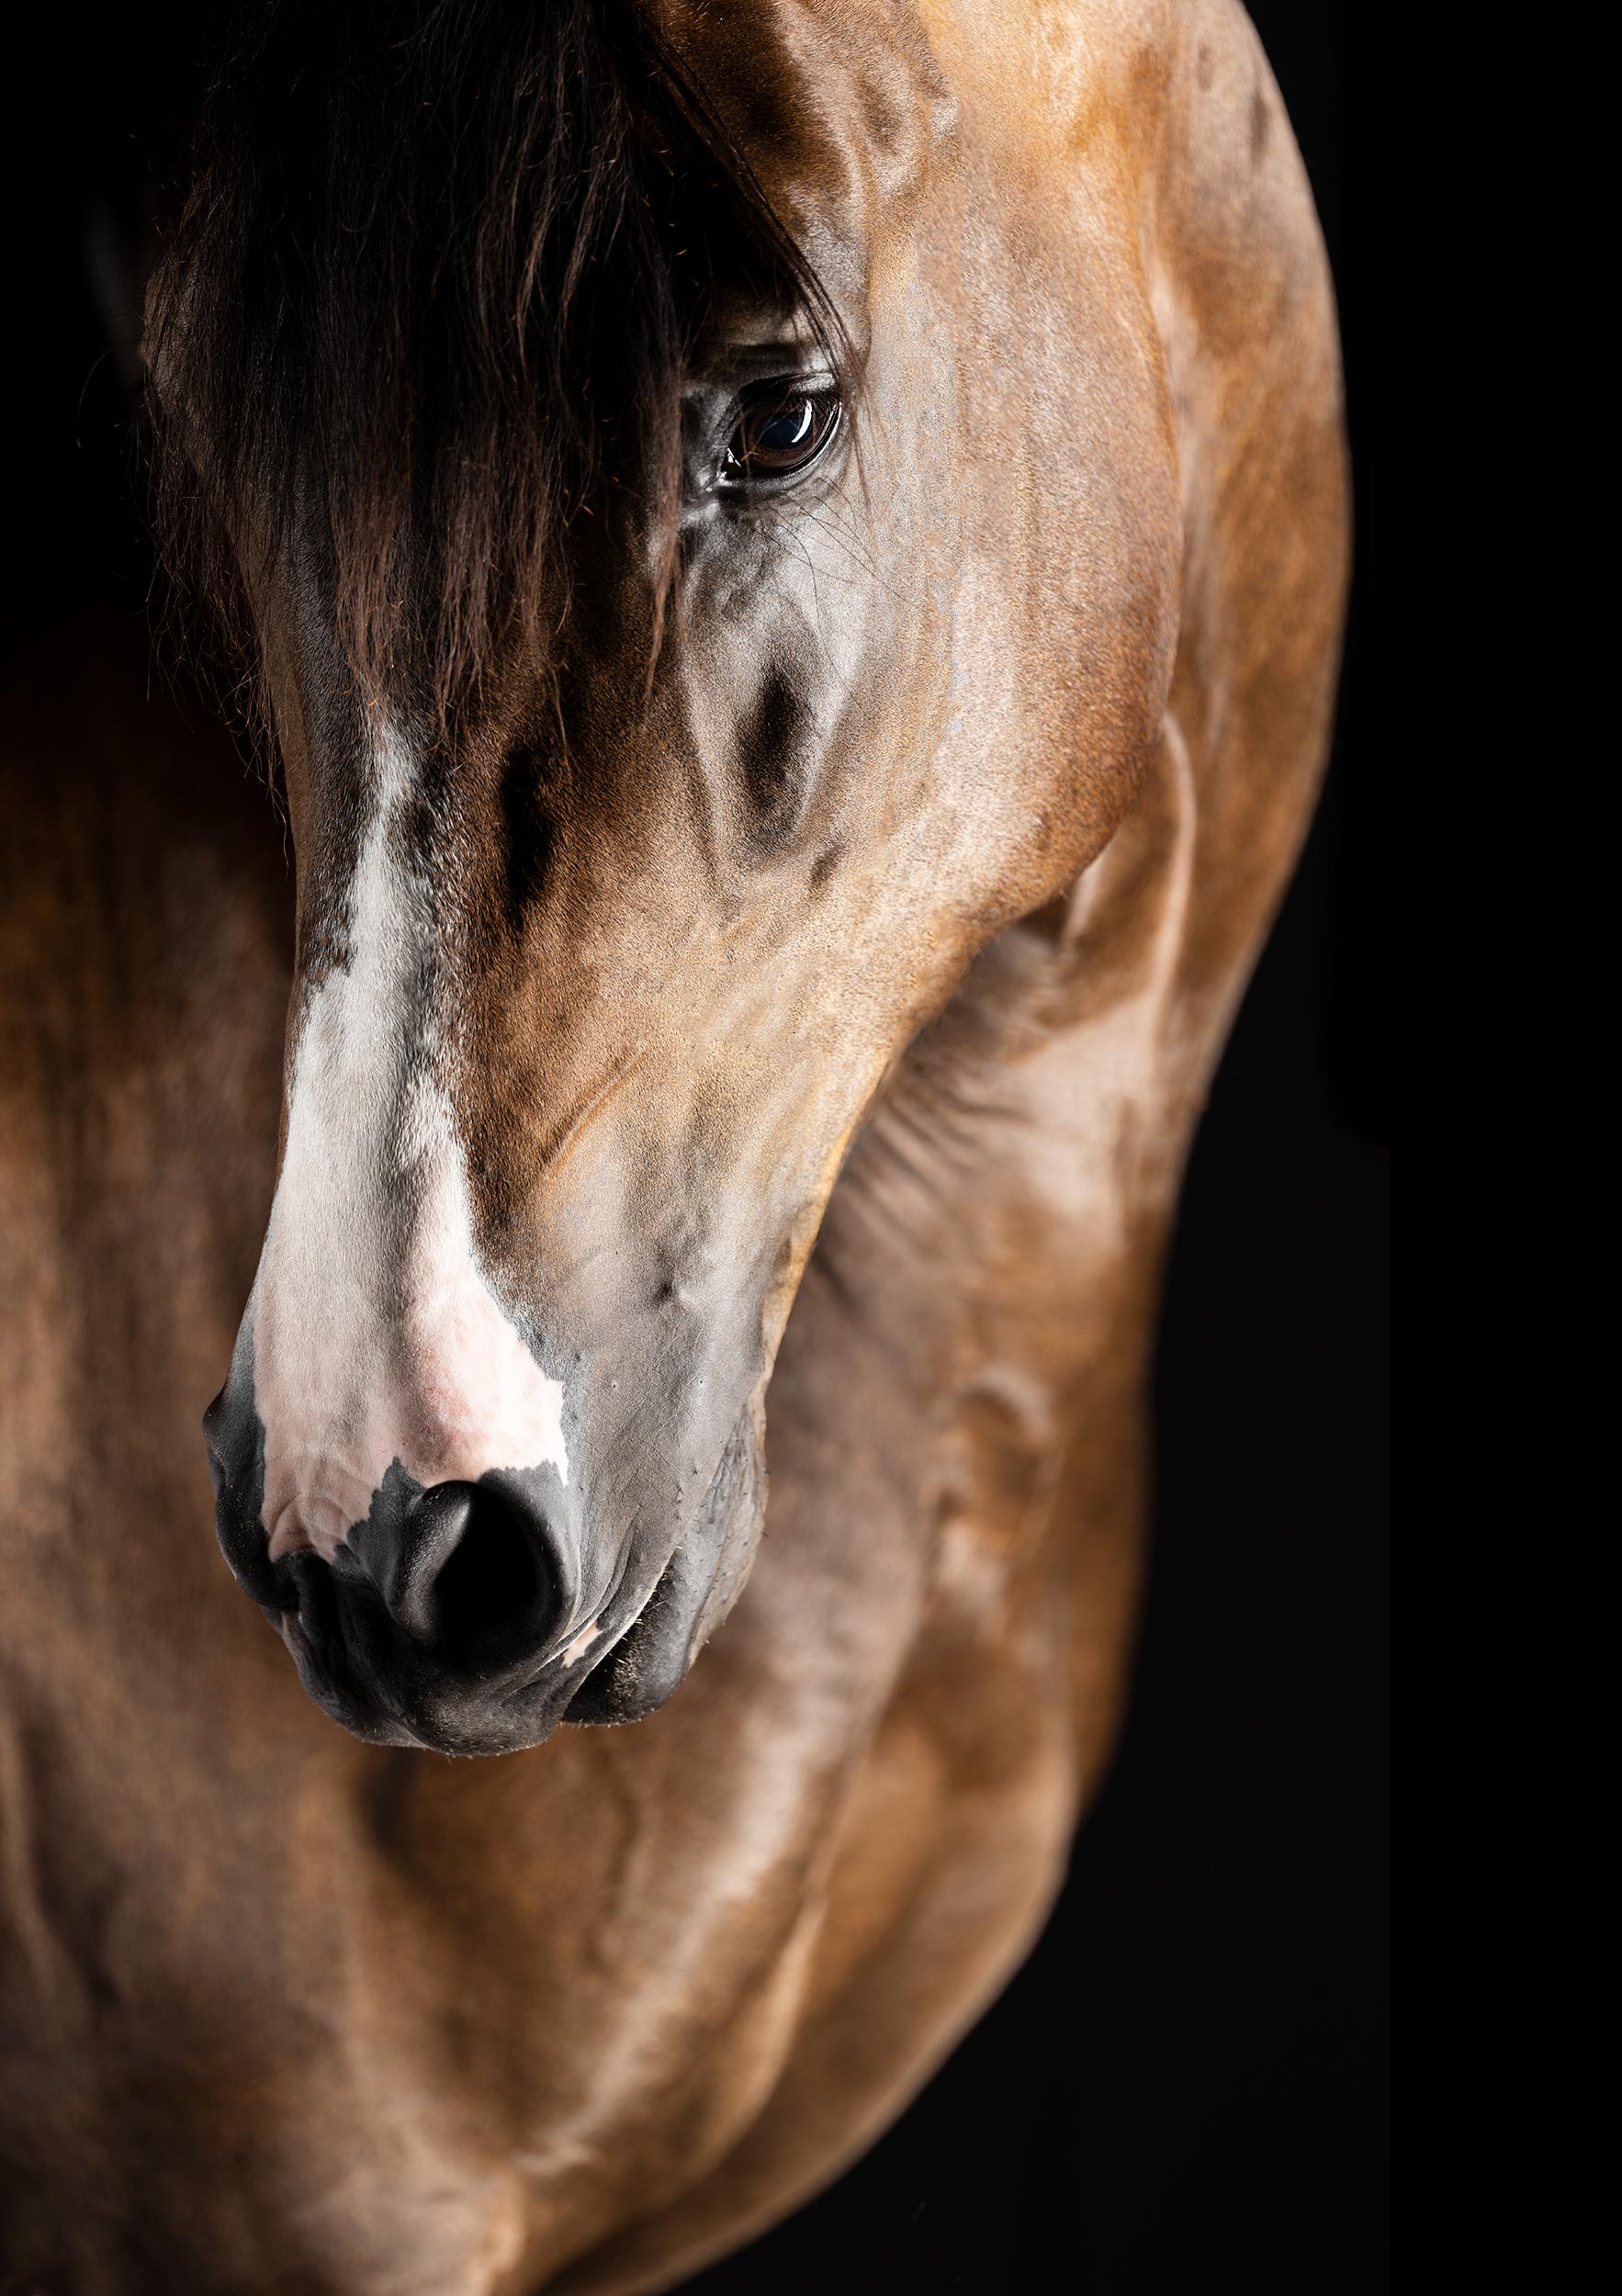 Archival Pigment Print Under Acrylic Glass

All available sizes and editions:
 40" x 60", Edition of 15
 47" x 71", Edition of 15 
 55" x 80", Edition of 15
 60" x 90", Edition of 10 
 71" x 96", Edition of 10


"Horses stir passion, inspire